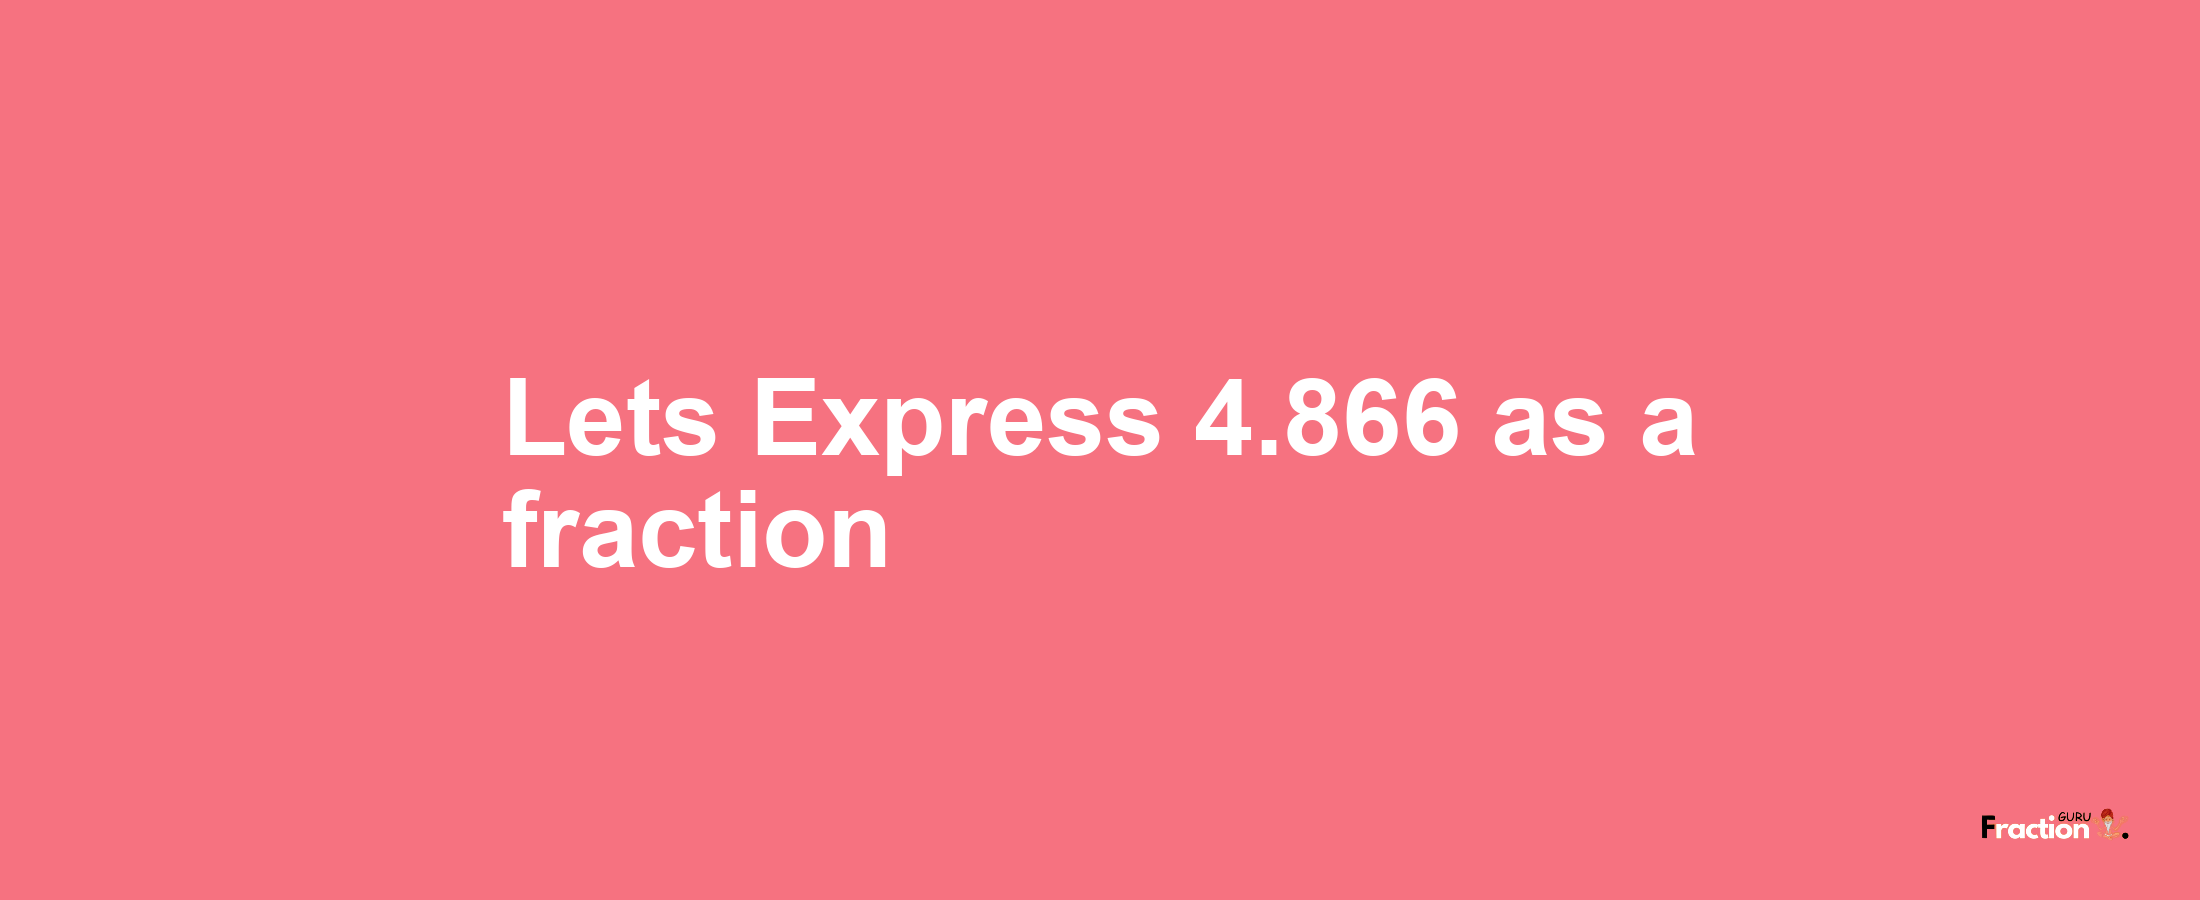 Lets Express 4.866 as afraction